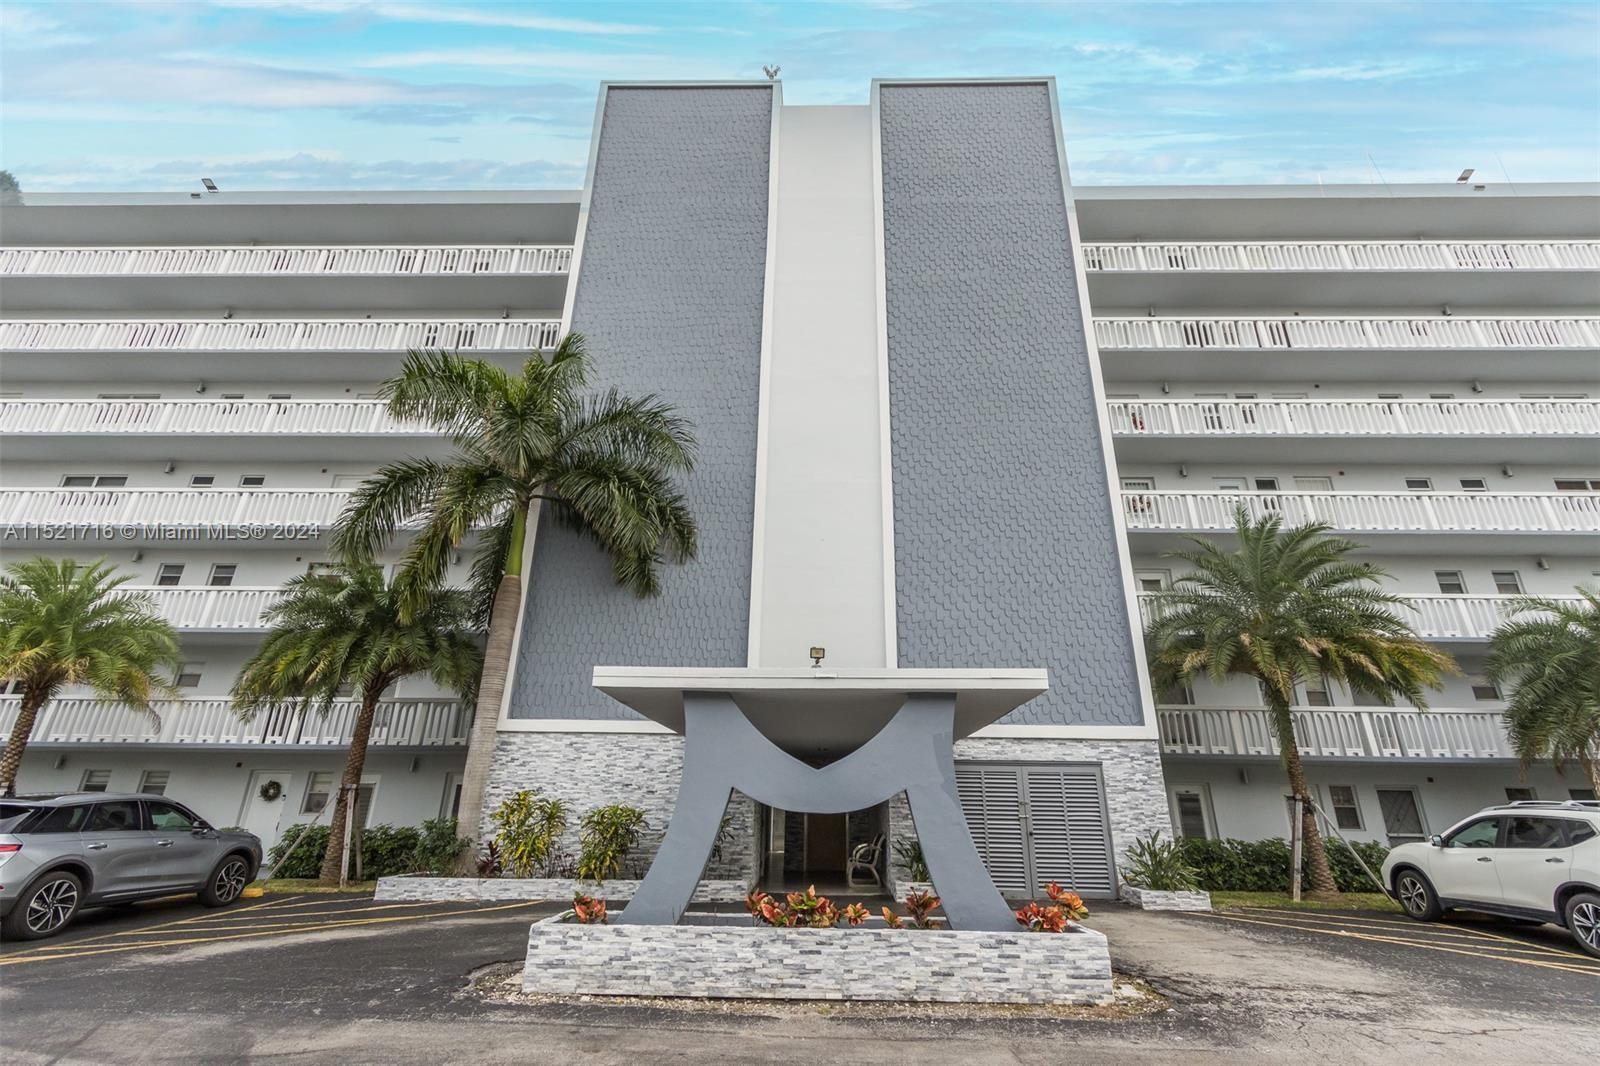 Beautiful and bright, 2 bedrooms 2 bathrooms spacious apt, located in the heart of Hallandale Beach,